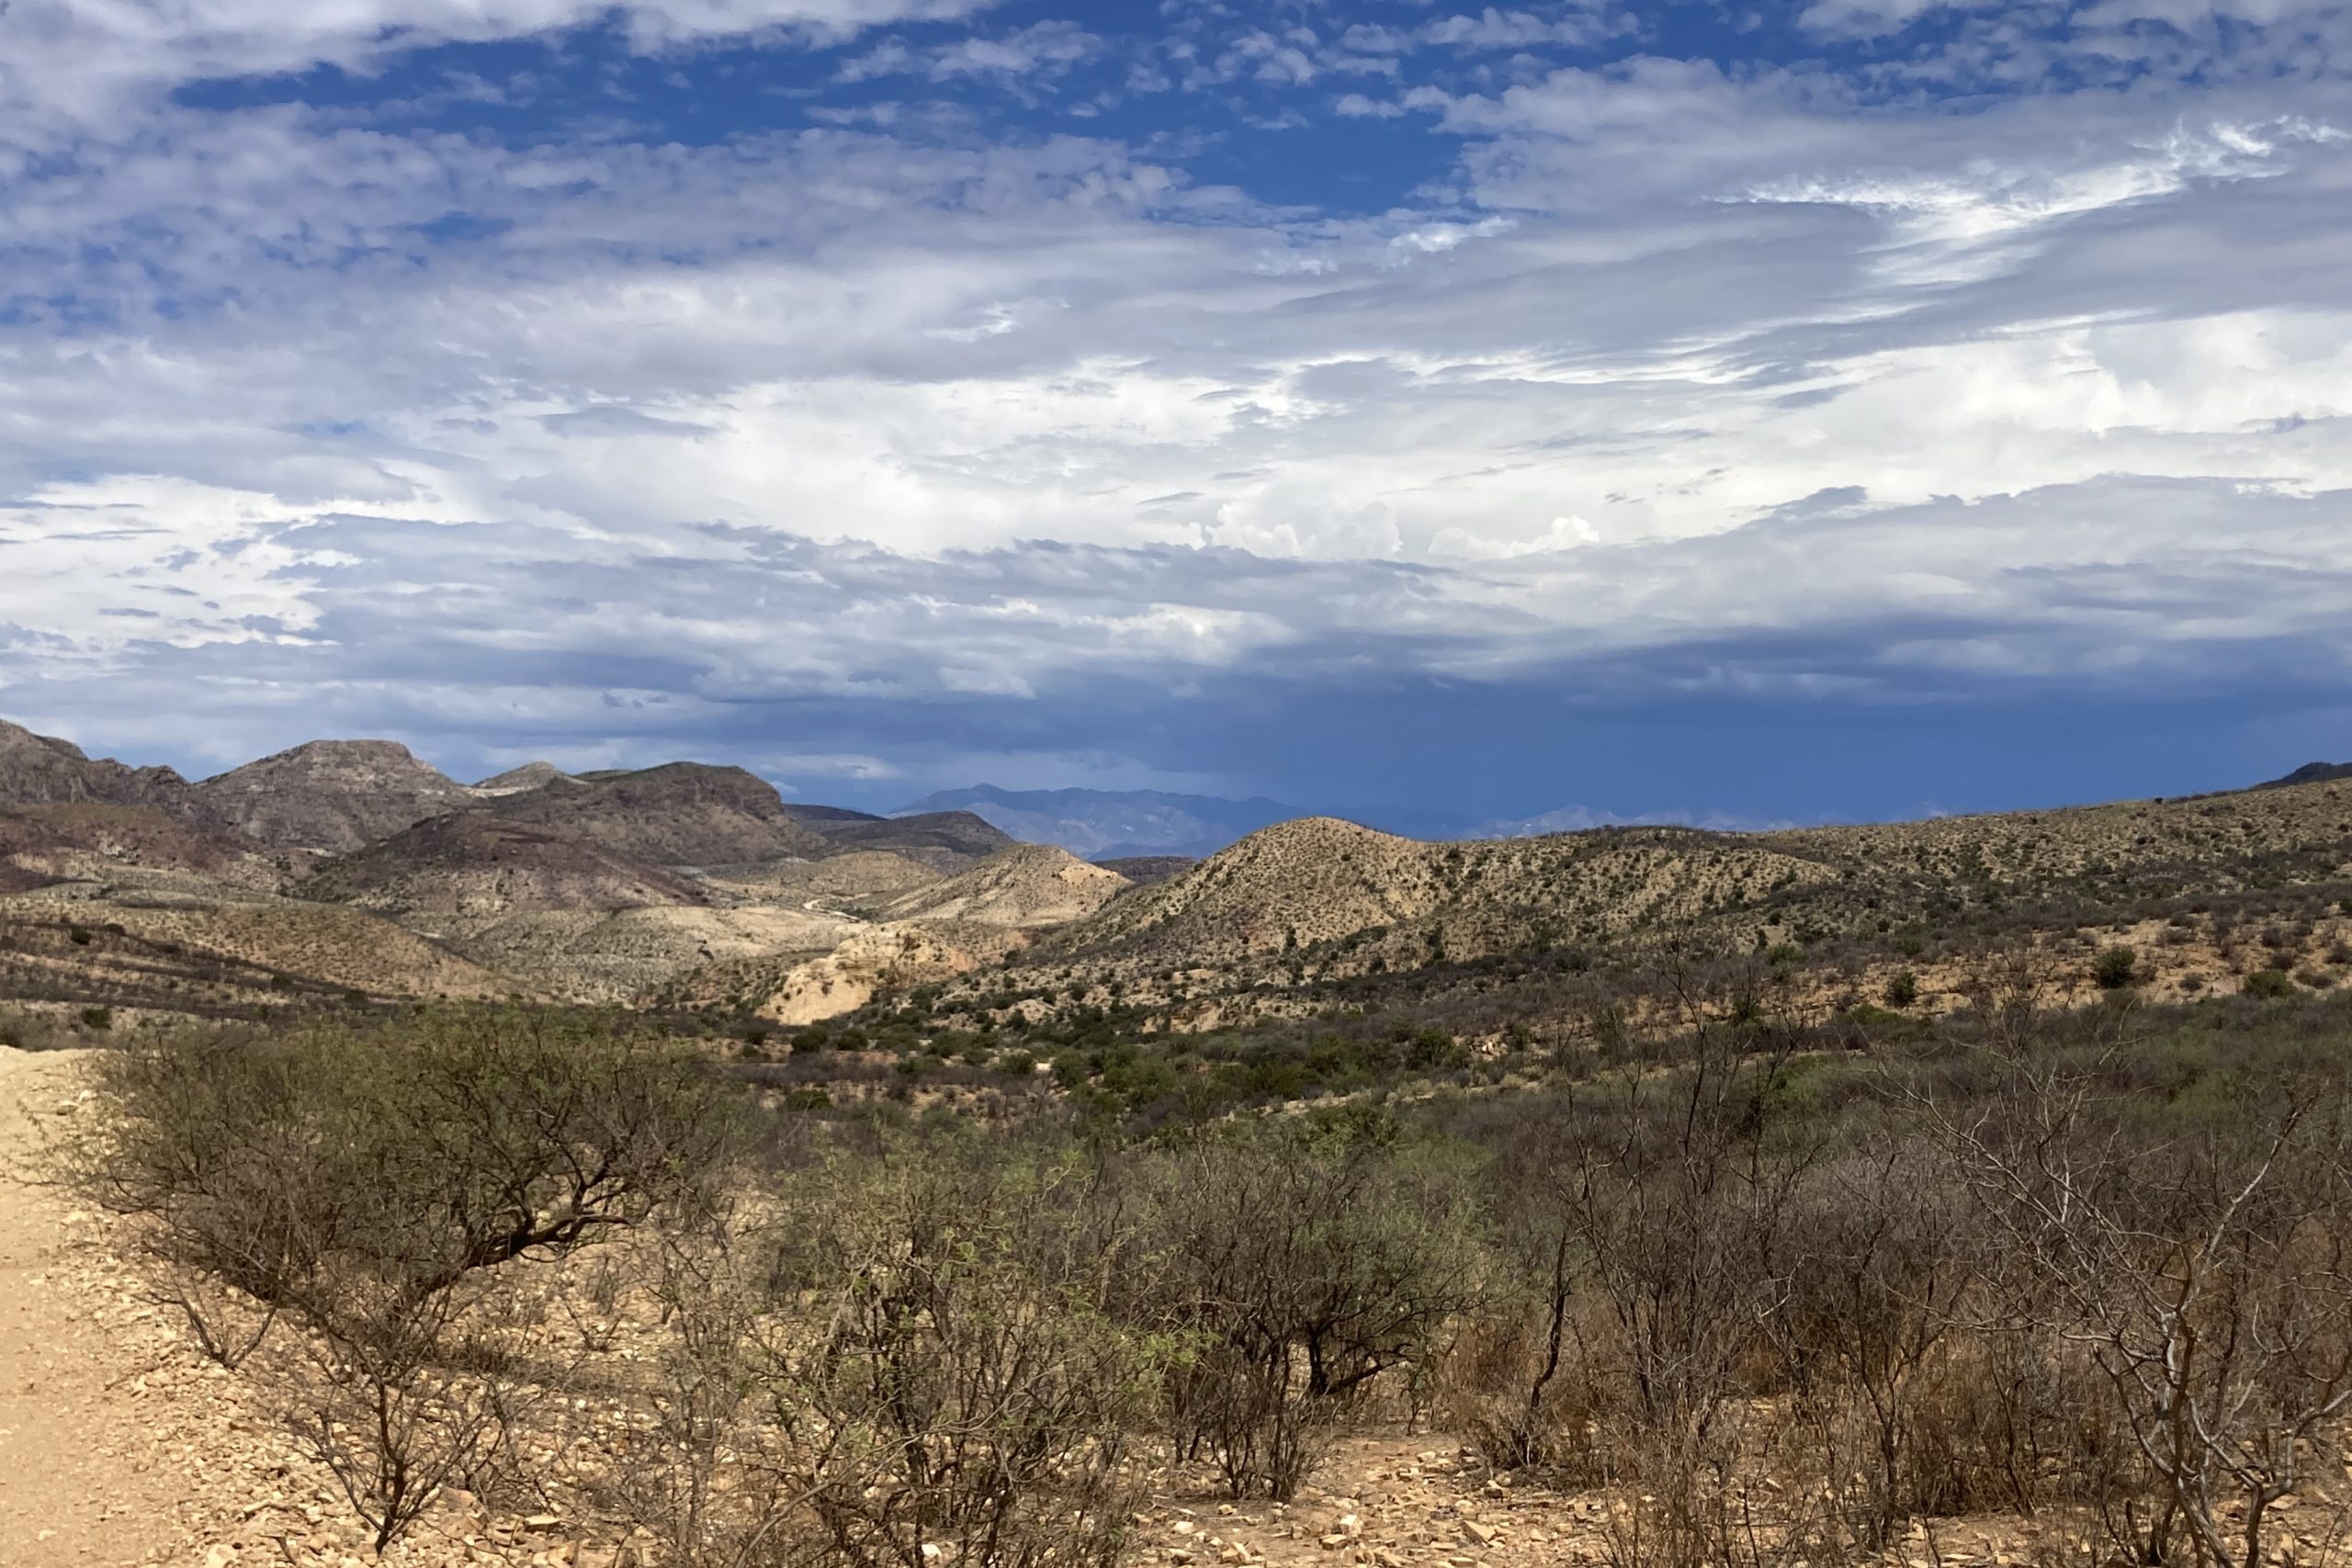 A photo of a landscape during the day. Blue sky with beautiful white clouds streaking across. The sky is the top half of the frame and the foothills of the Sierra Madre Occidentals fill the bottom half of the photo. The landscape looks dry, but there are hunter green scrubby plants and dotted greens of pine. Darker blue mountains are in the background.